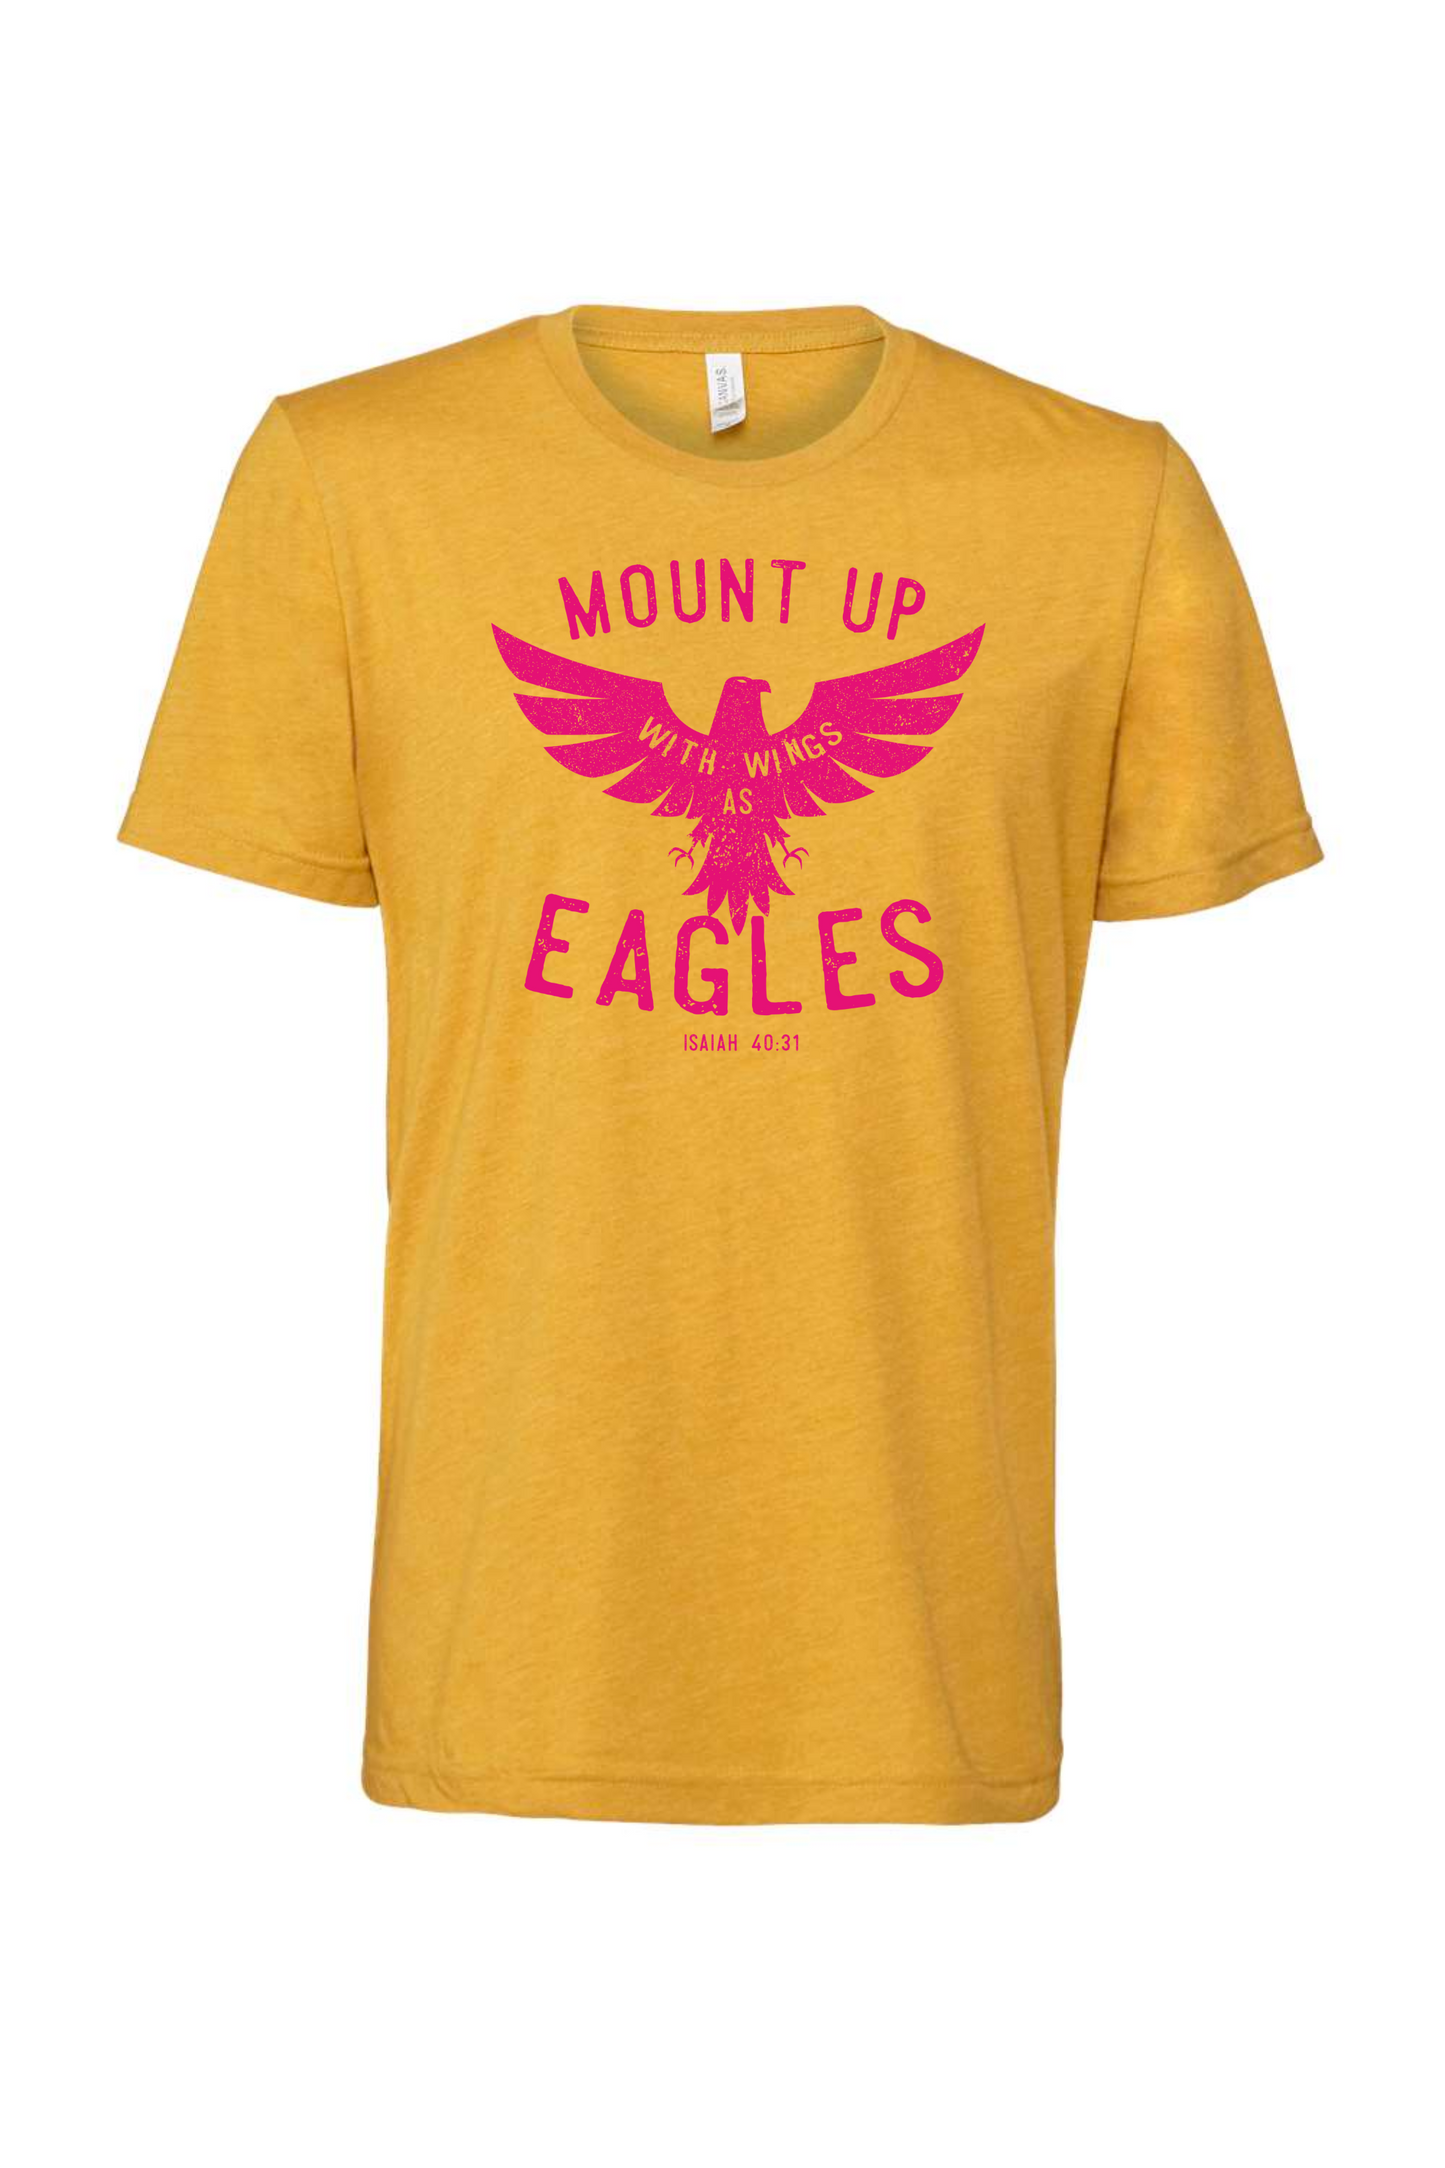 Wings Like Eagles | Kids Tee-Kids Tees-Sister Shirts-Sister Shirts, Cute & Custom Tees for Mama & Littles in Trussville, Alabama.